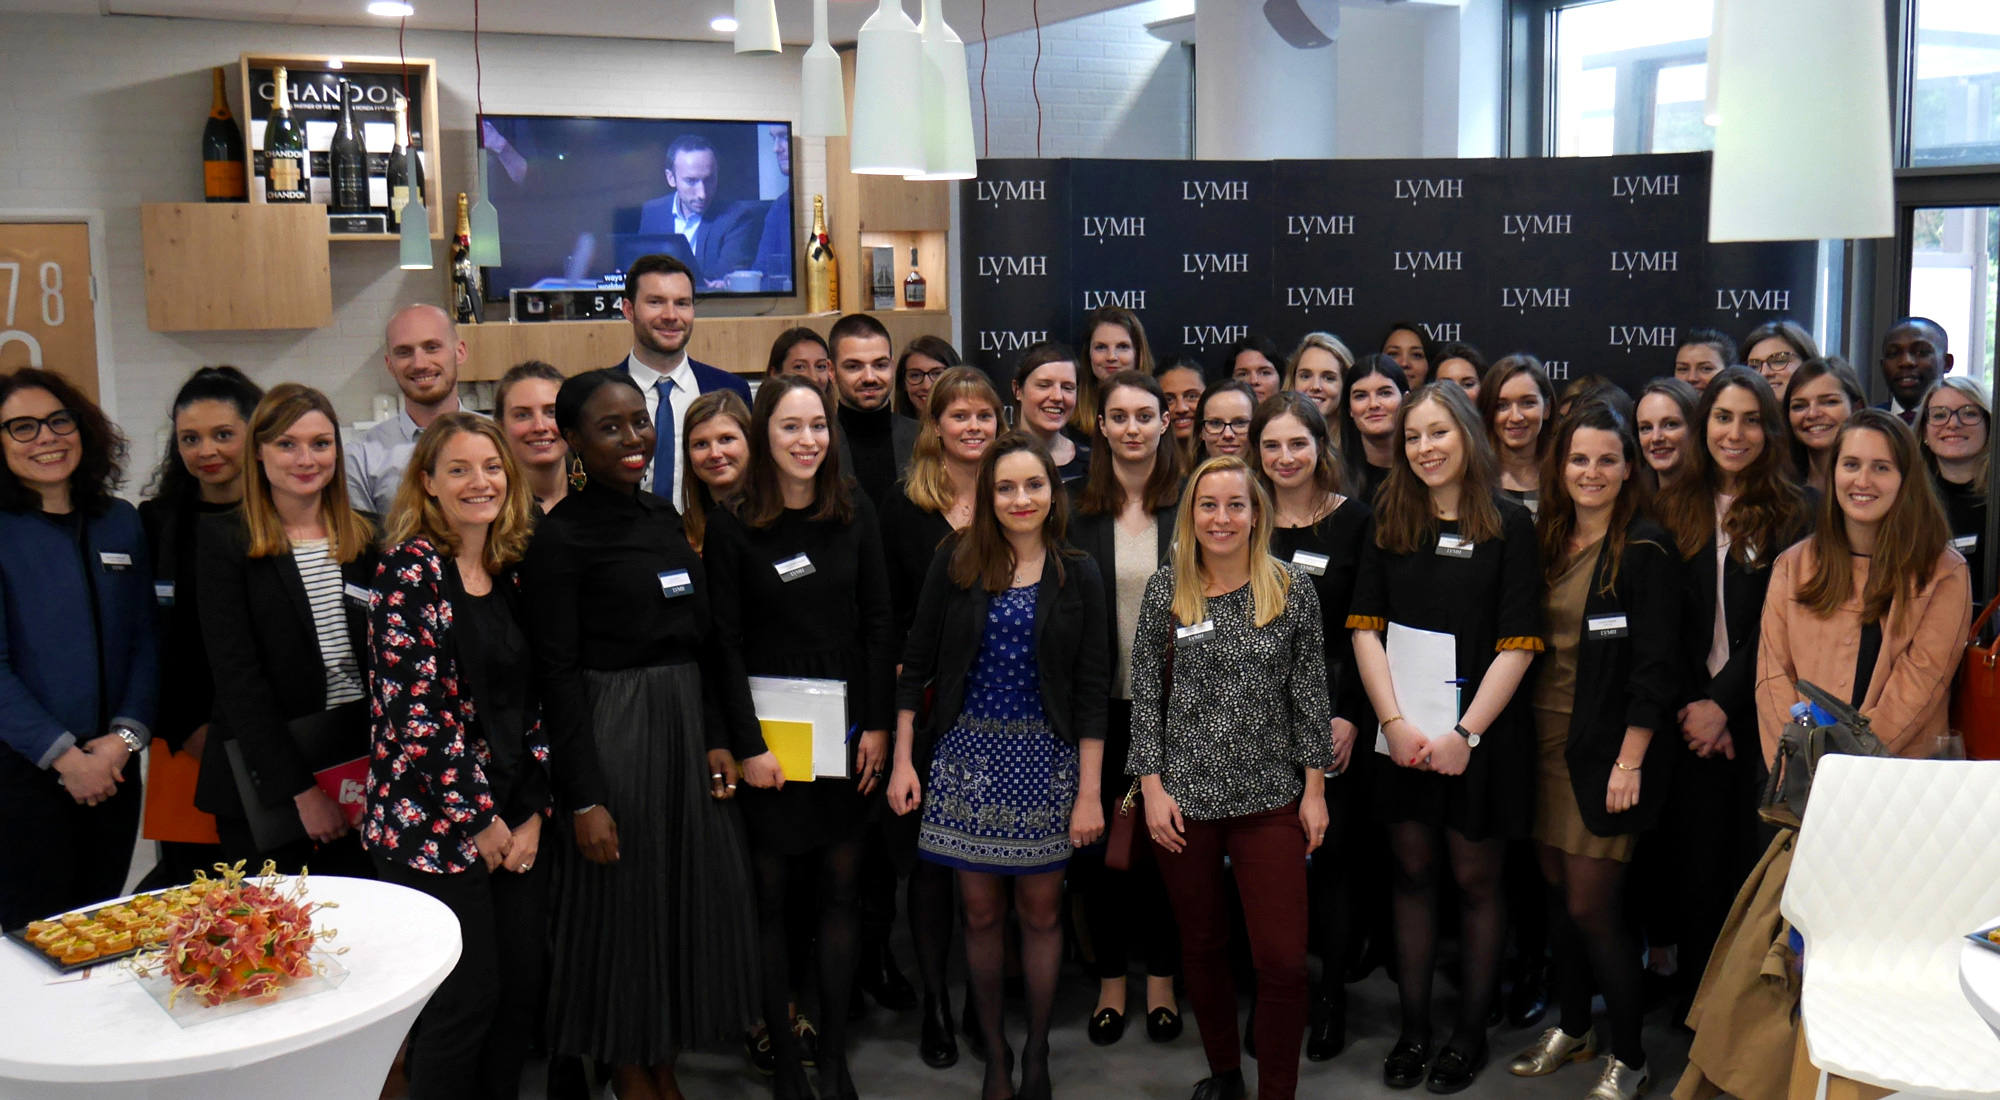 At accelerere Bage Rasende LVMH “Boost Your Career” guides interns towards the next step in their  careers - LVMH